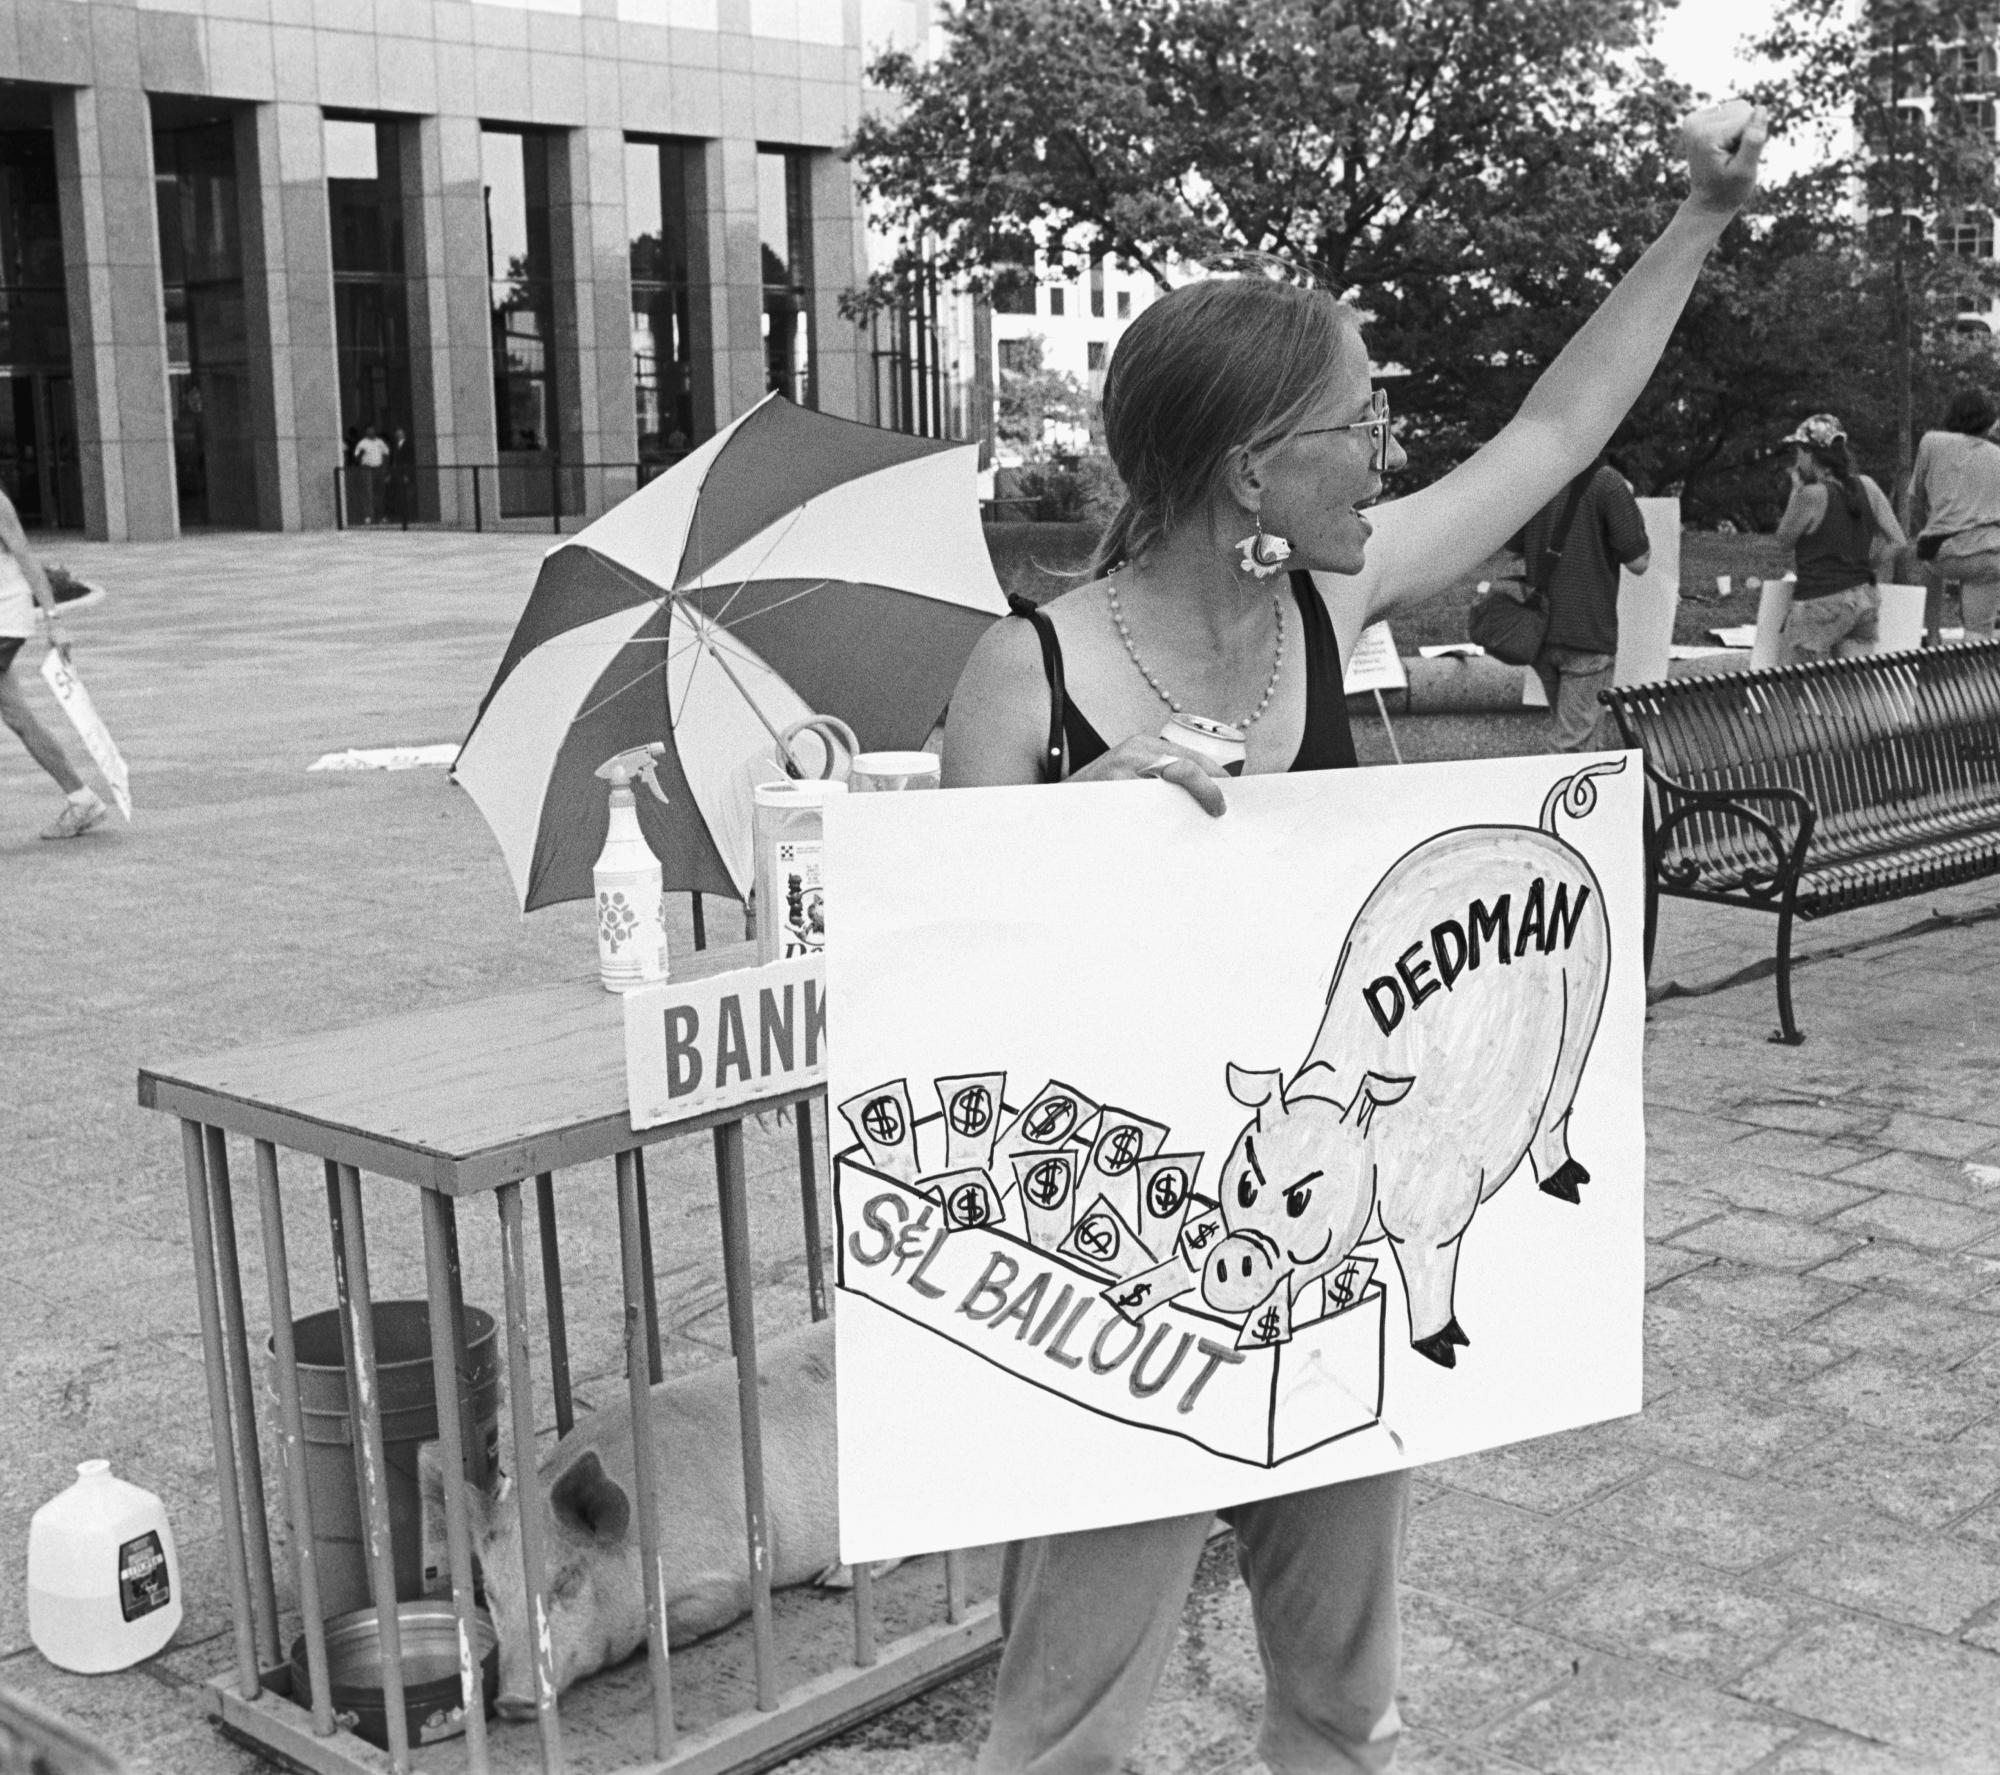 Daily Texan (1990 #1) - Franklin Federal Protest #2